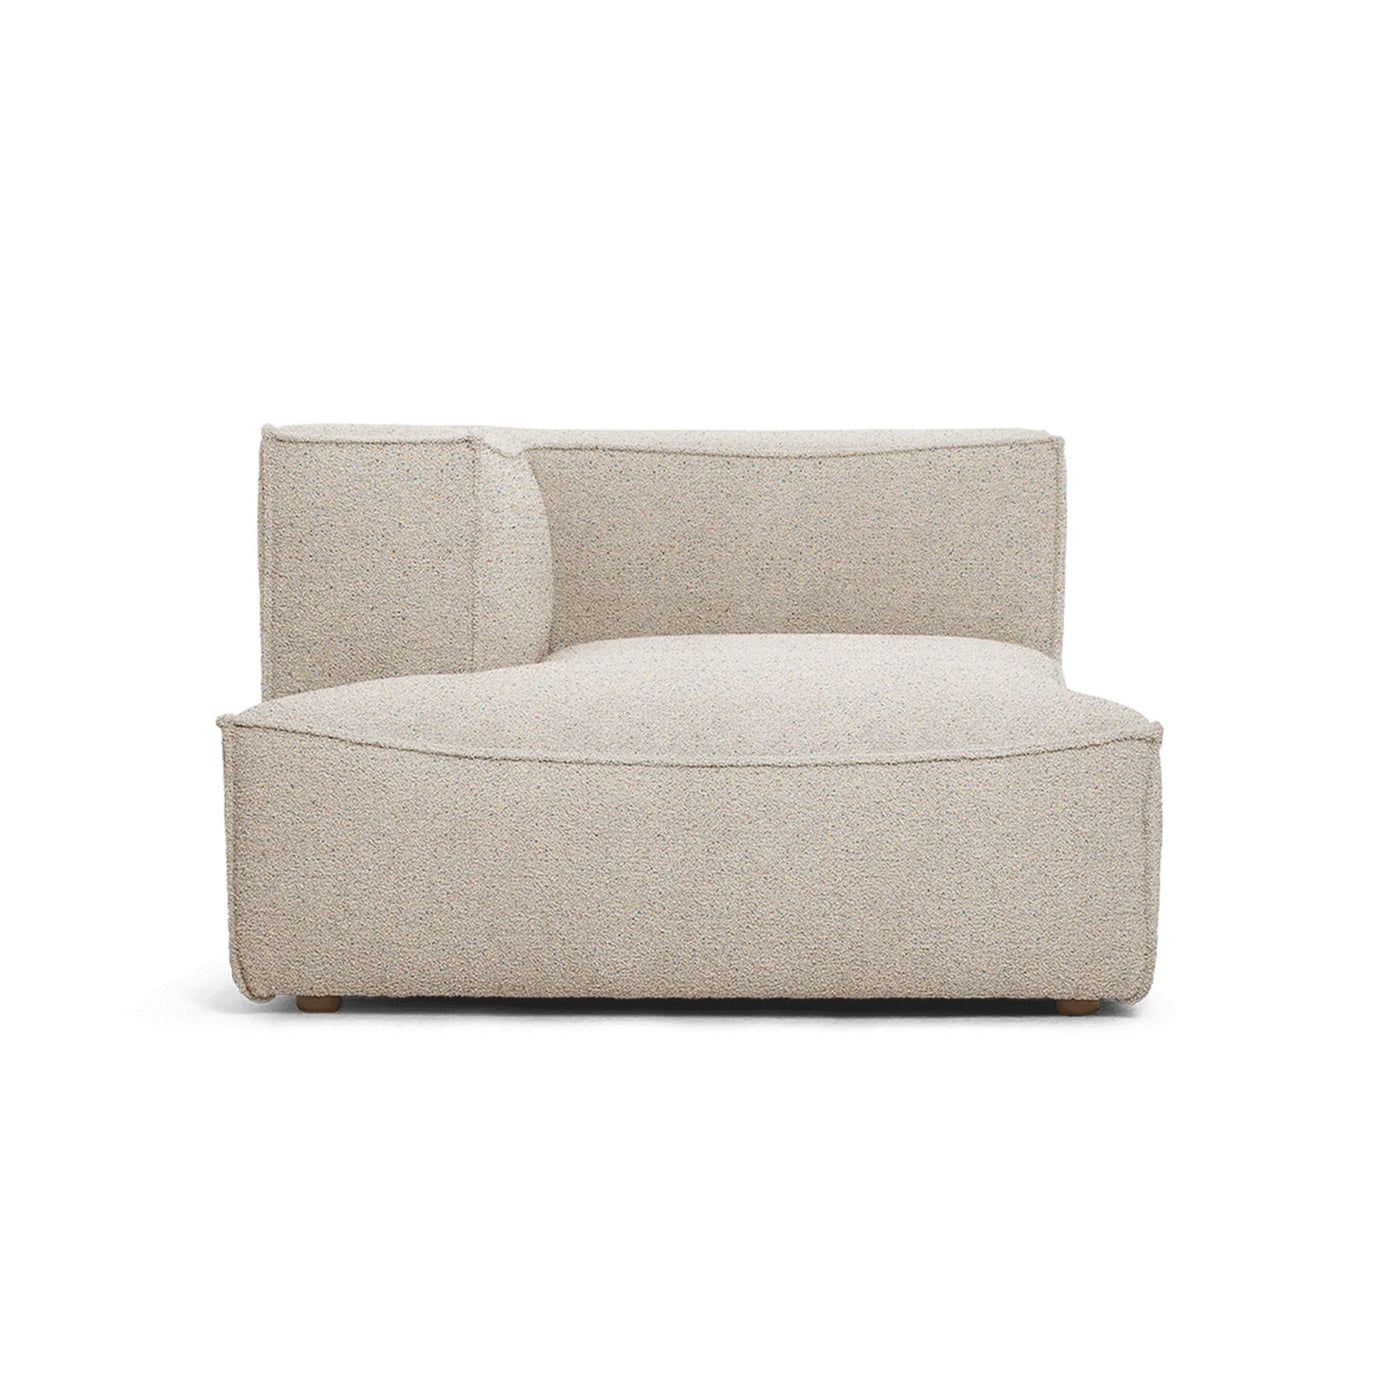 Ferm Living Catena Modular Series. Shop online at someday designs. L600 module in #colour_natural-wool-boucle